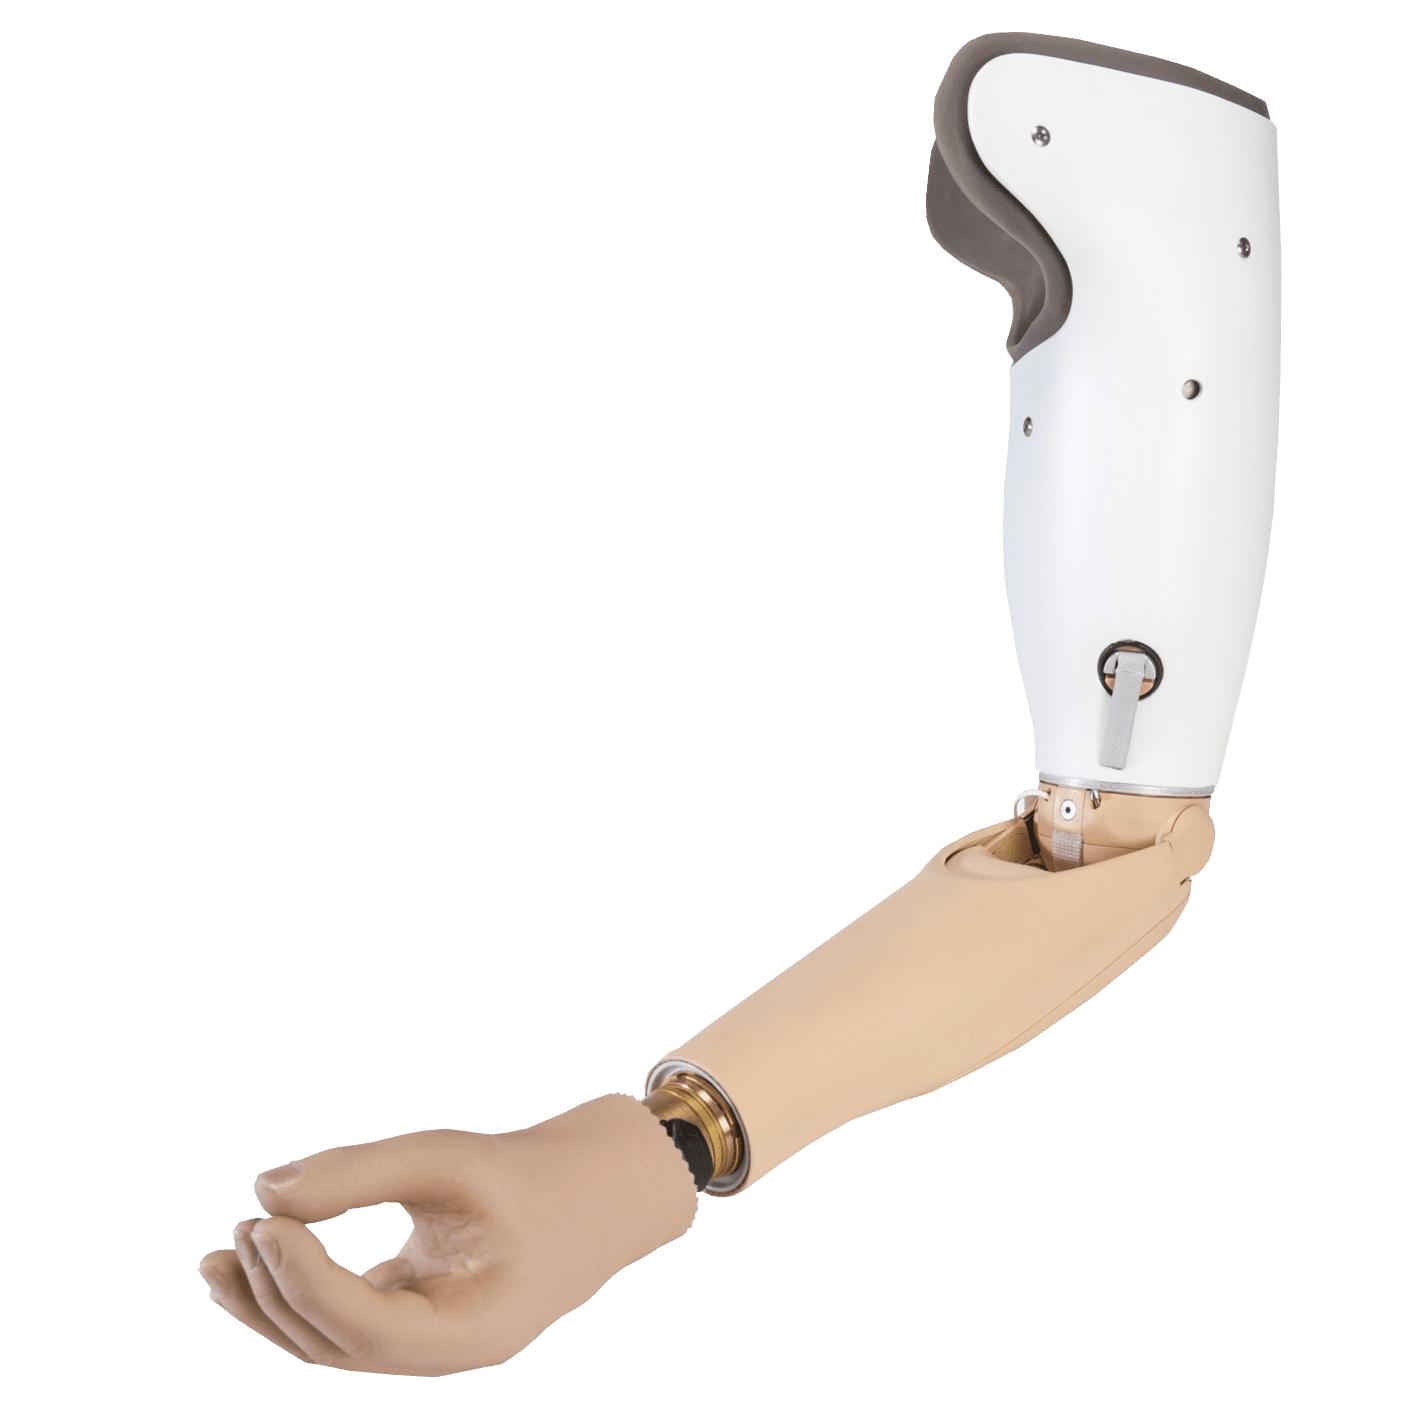 a. Above: Realistic prosthetic limb for upper limb loss made of